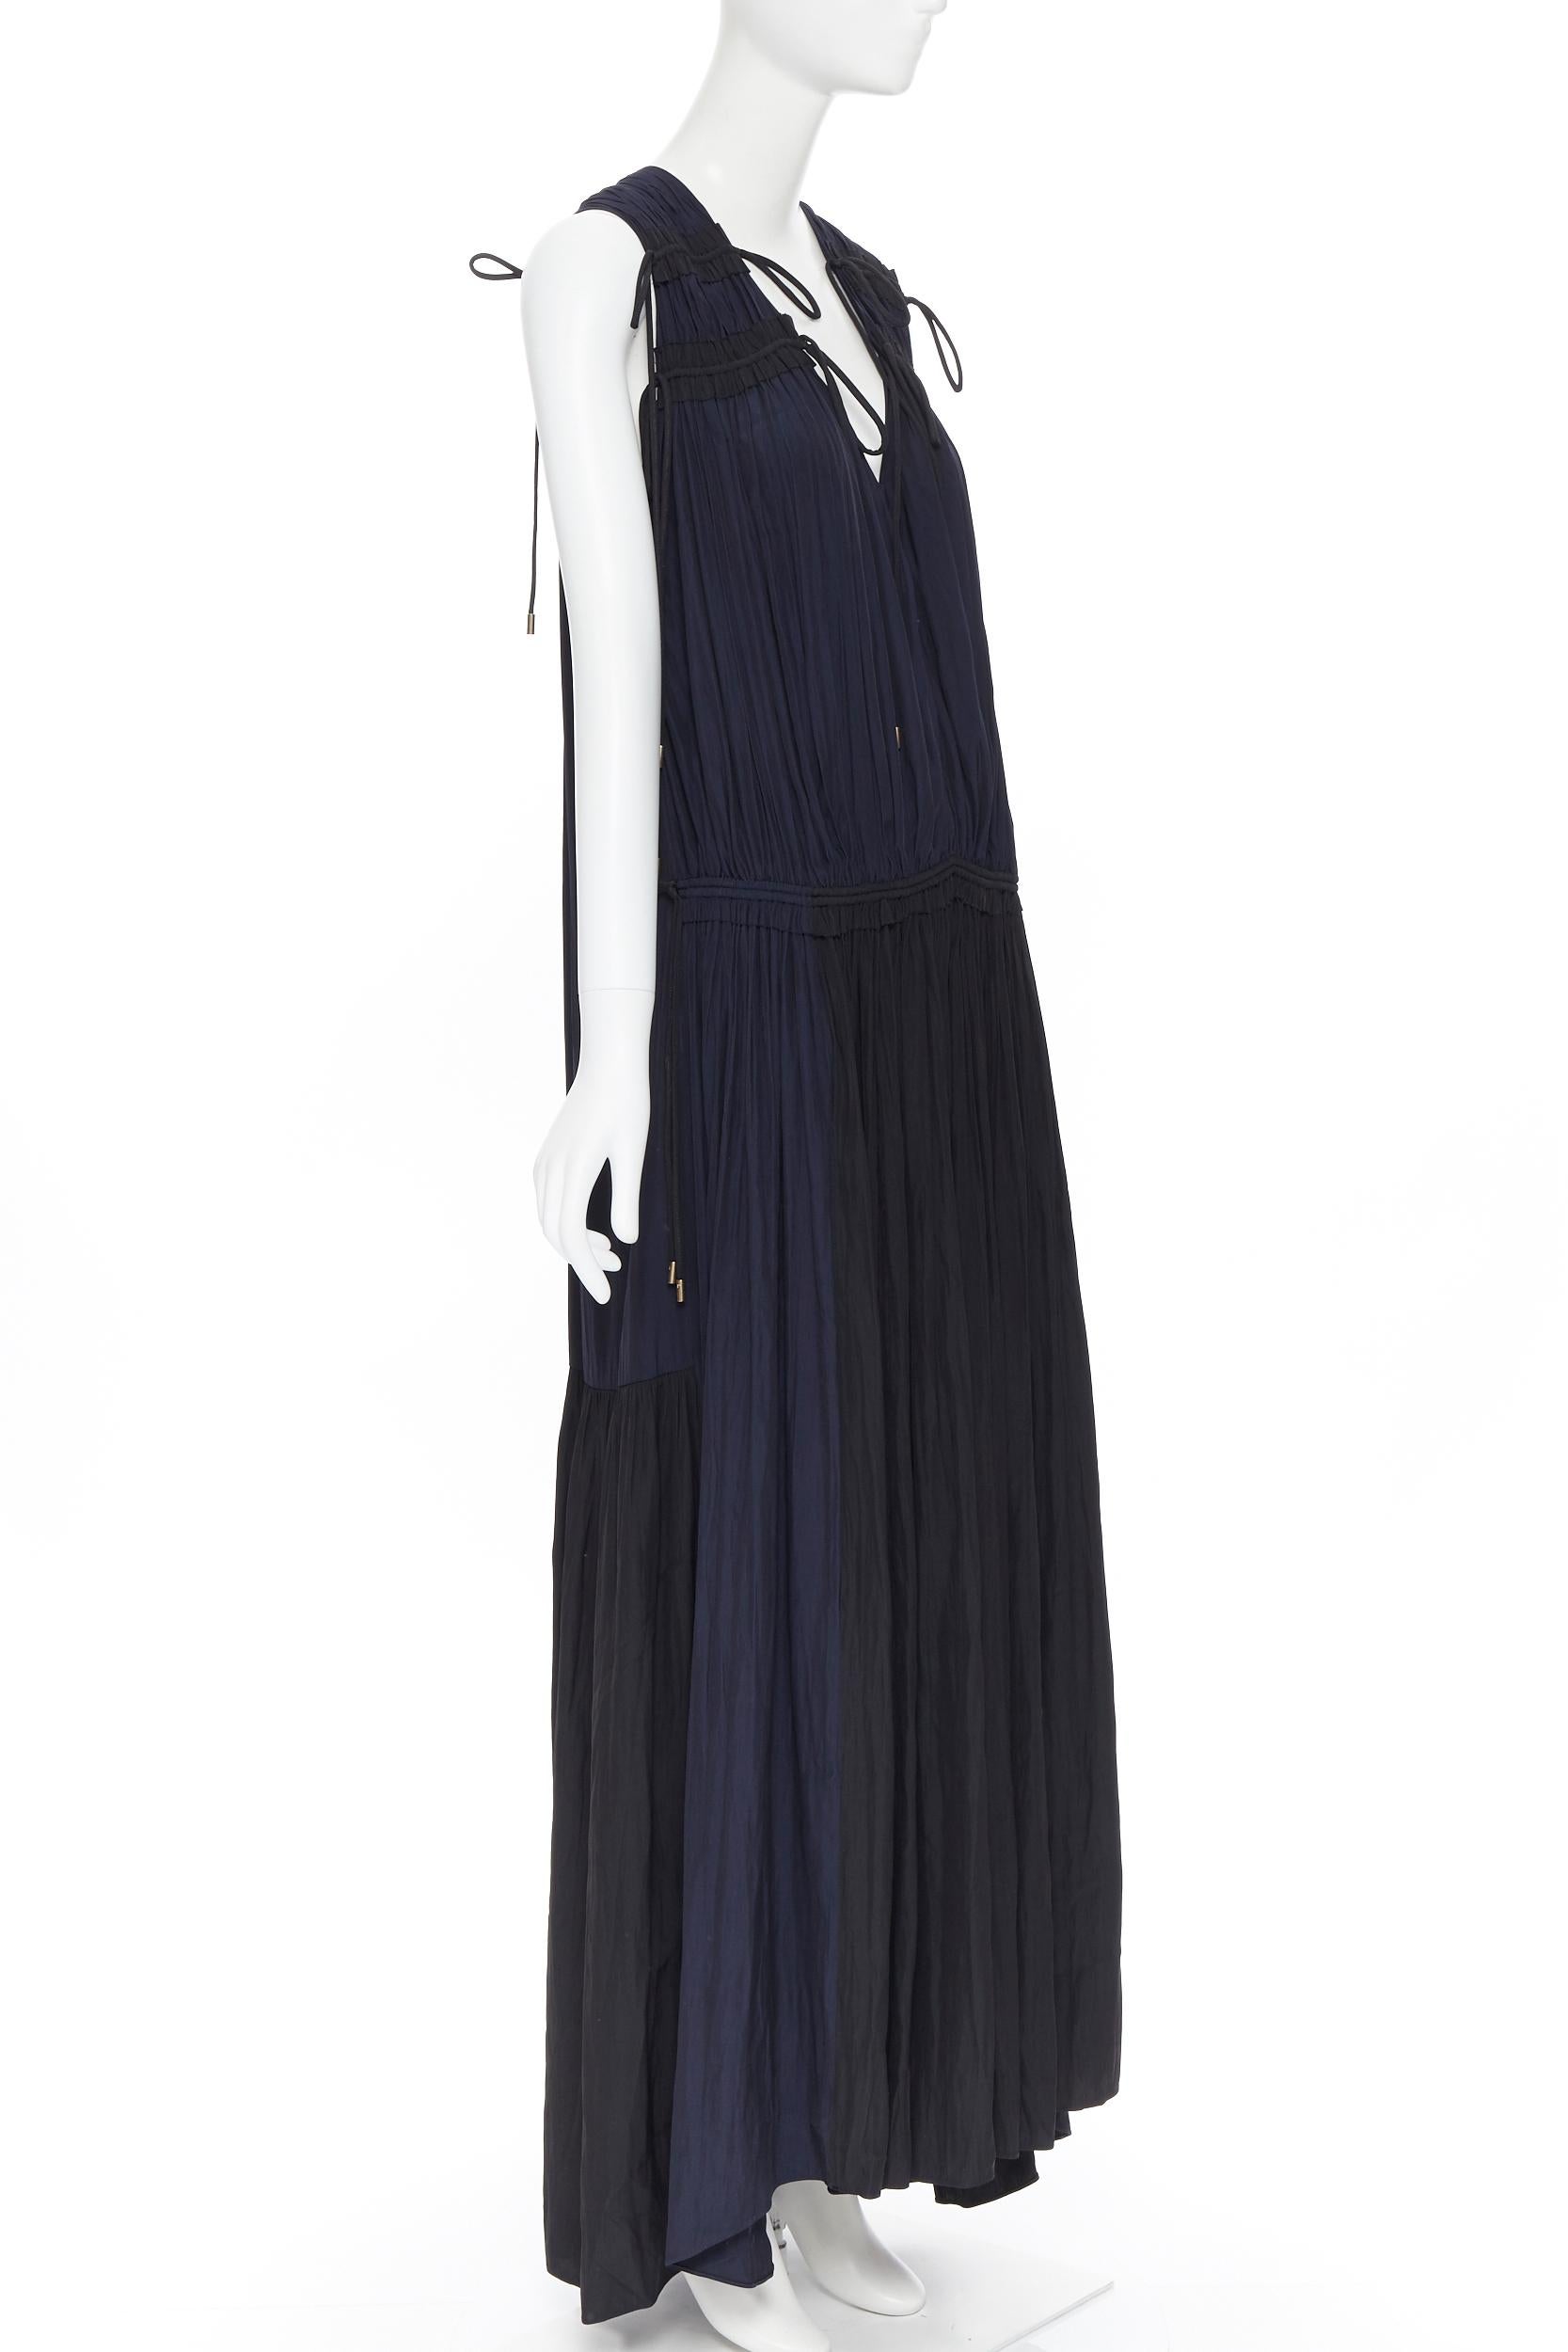 new LANVIN ALBER ELBAZ midnight blue black pleated tie detail maxi dress FR34 XS In New Condition For Sale In Hong Kong, NT